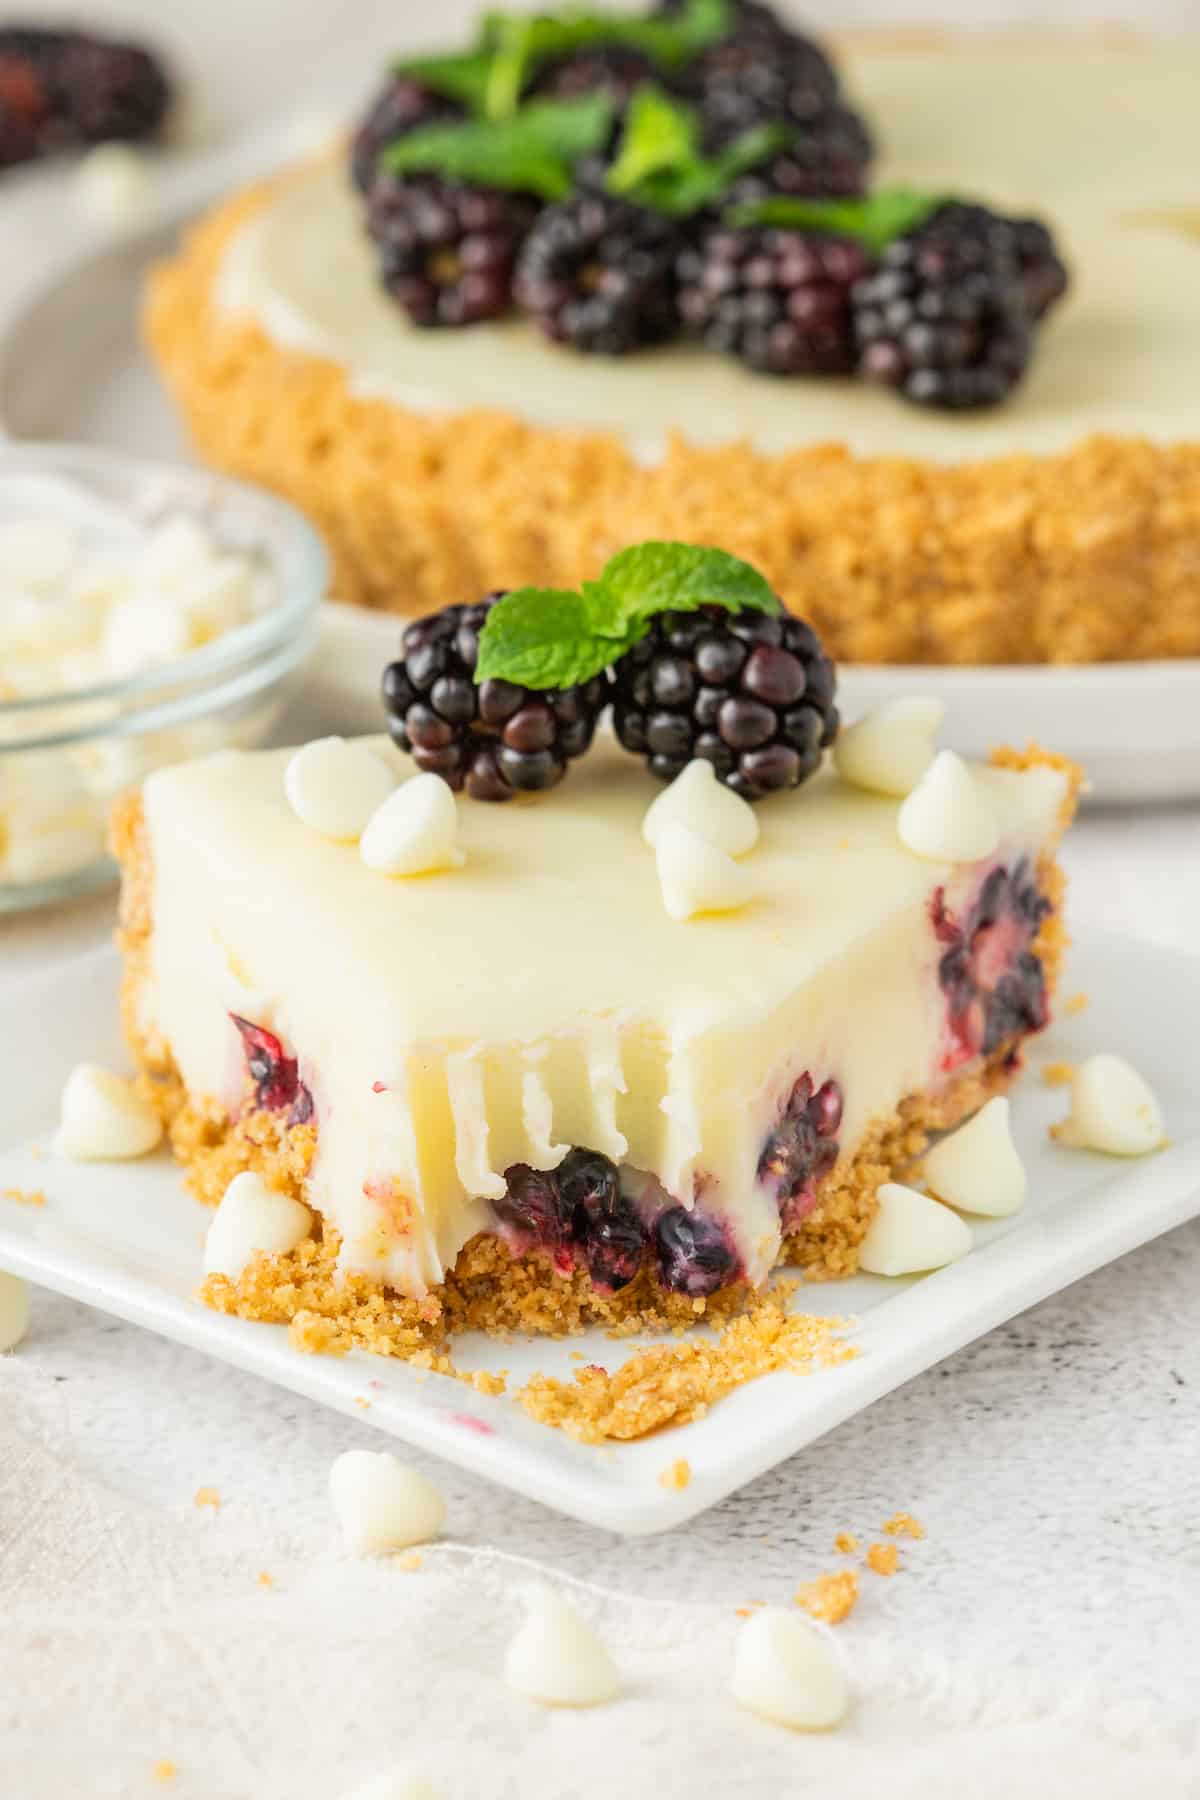 A slice of blackberry cheesecake on a plate.